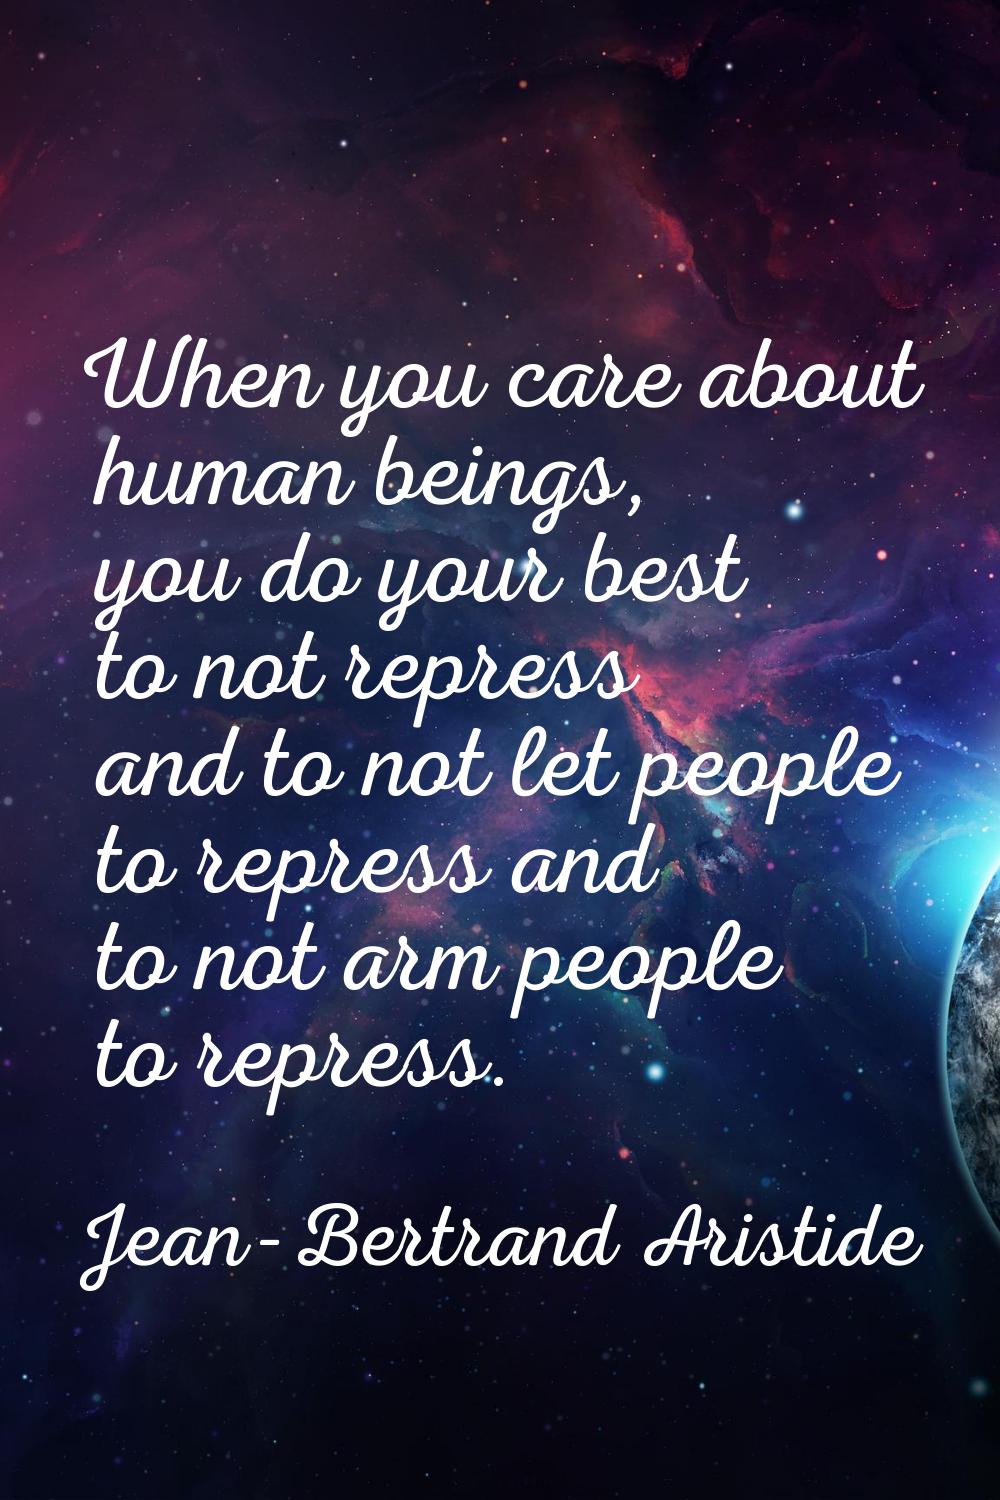 When you care about human beings, you do your best to not repress and to not let people to repress 